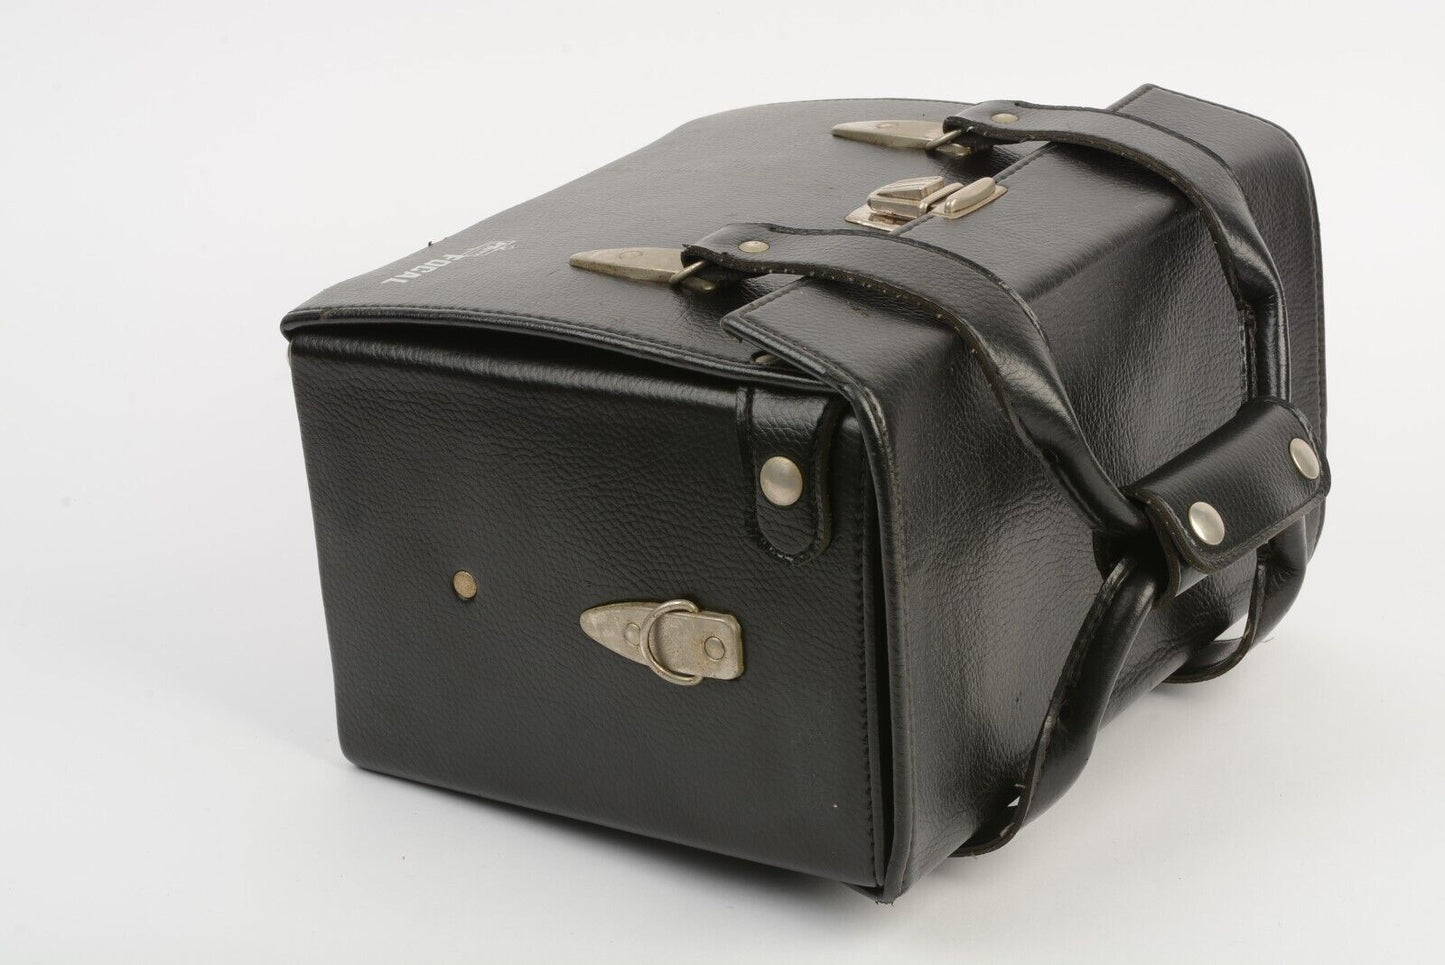 EXC+ VINTAGE FOCAL FAUX LEATHER CAMERA CASE WITH MOLDED INSERT BLACK 12x9x7"